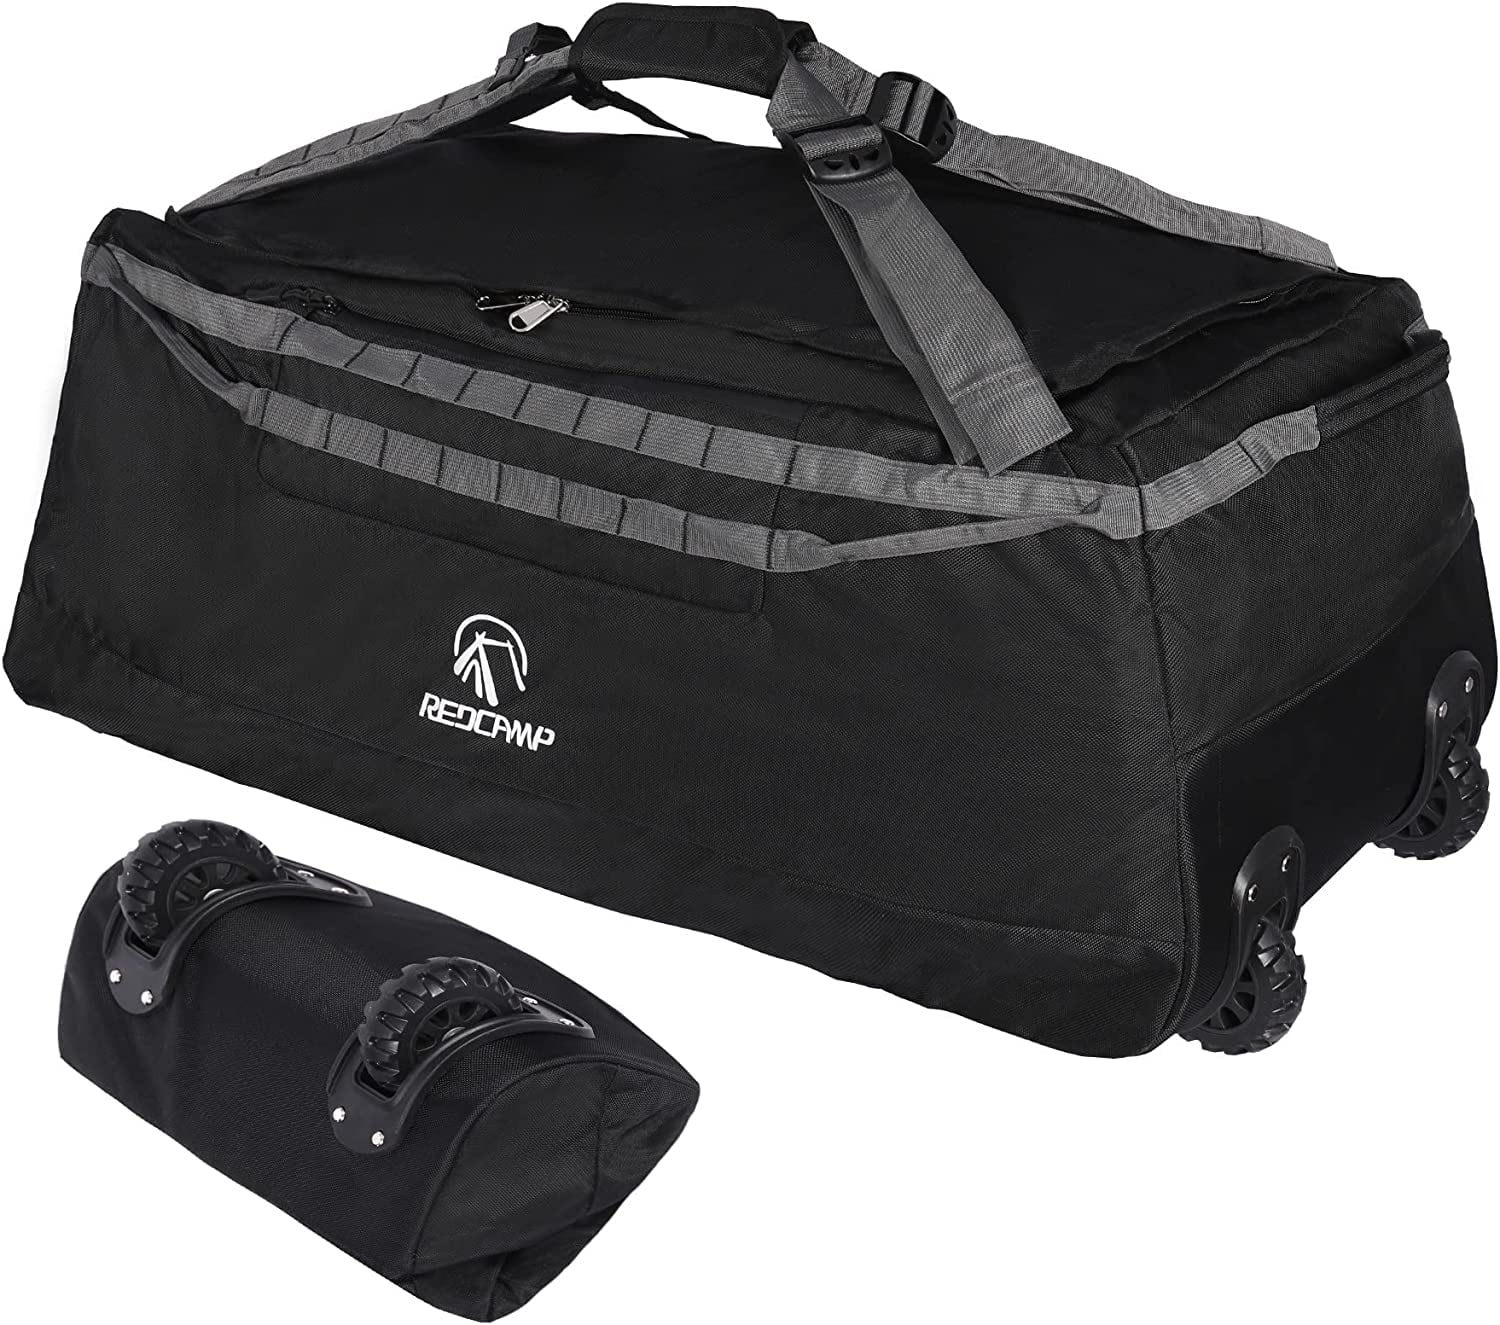 REDCAMP 140L Foldable Duffle Bag with Wheels and Backpack Straps, 1680D ...